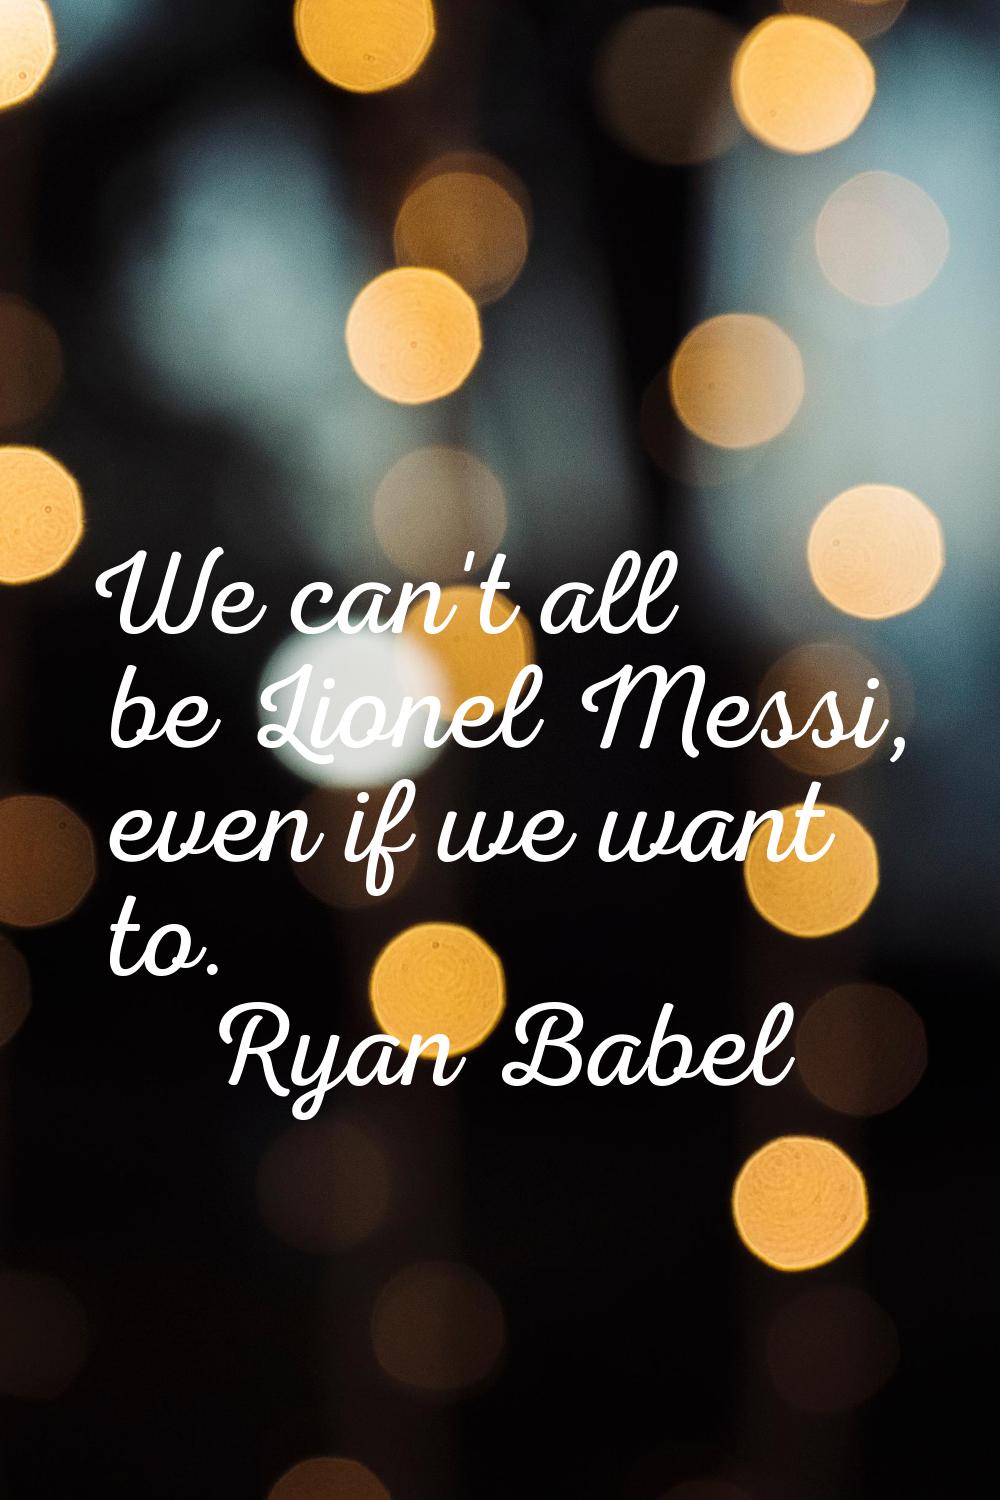 We can't all be Lionel Messi, even if we want to.